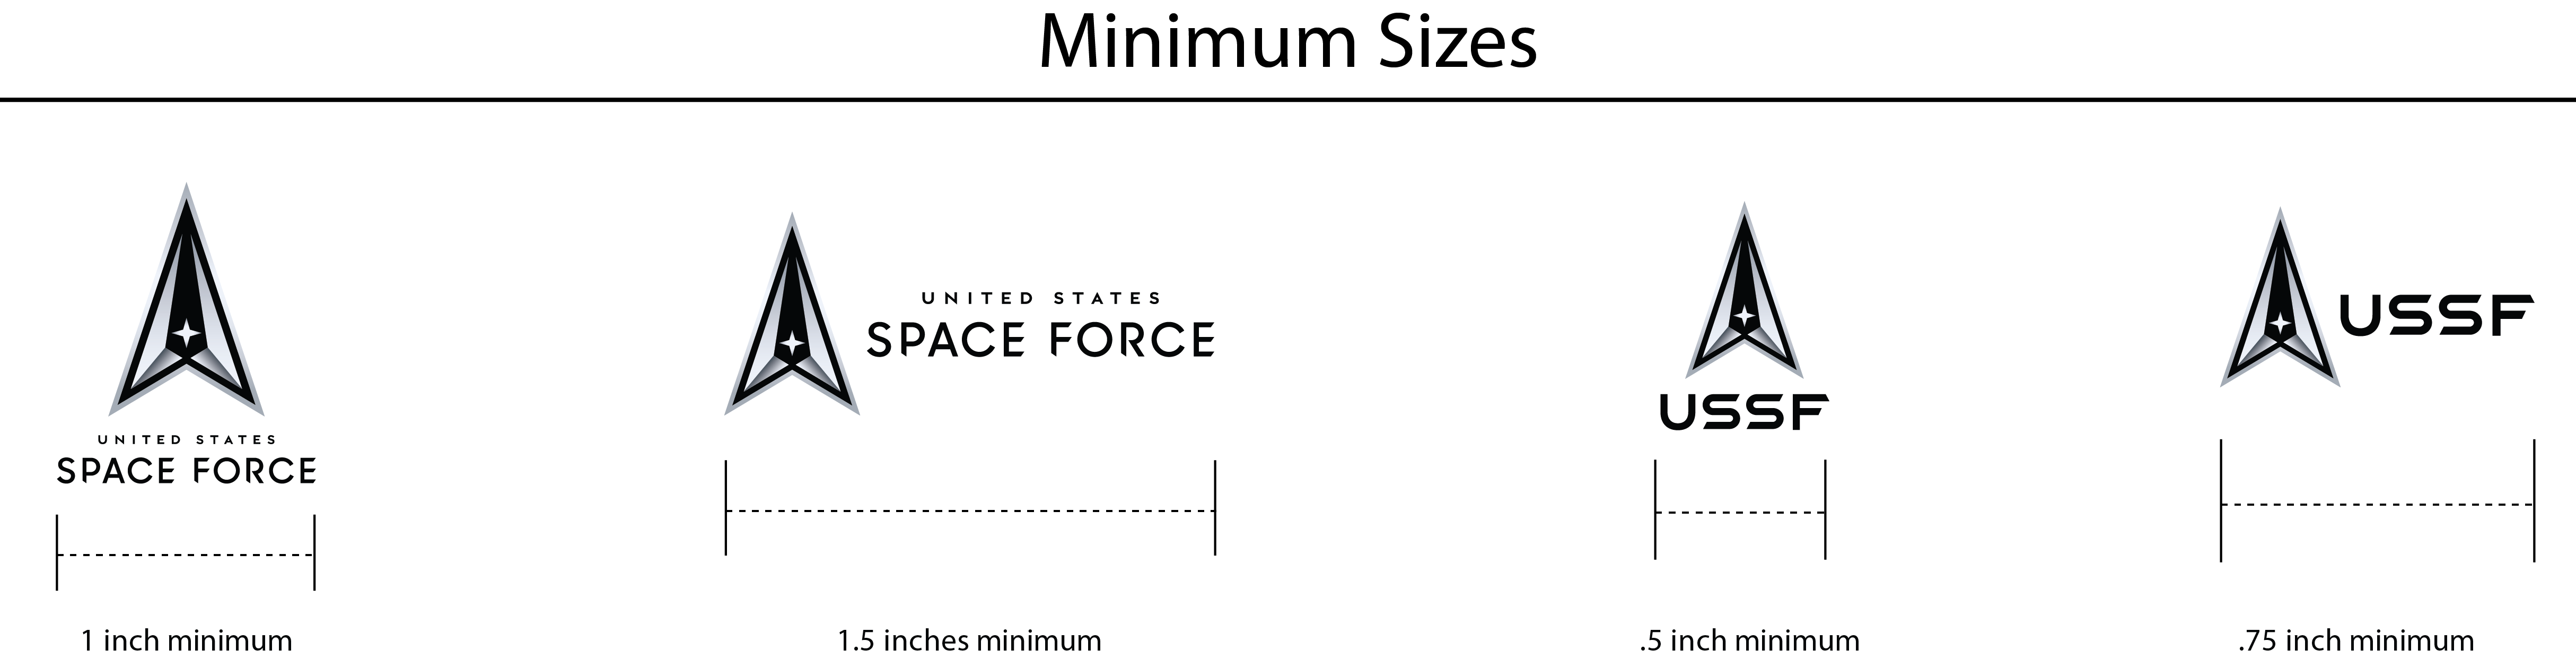 Images showing minimum size requirements of Space Force signature